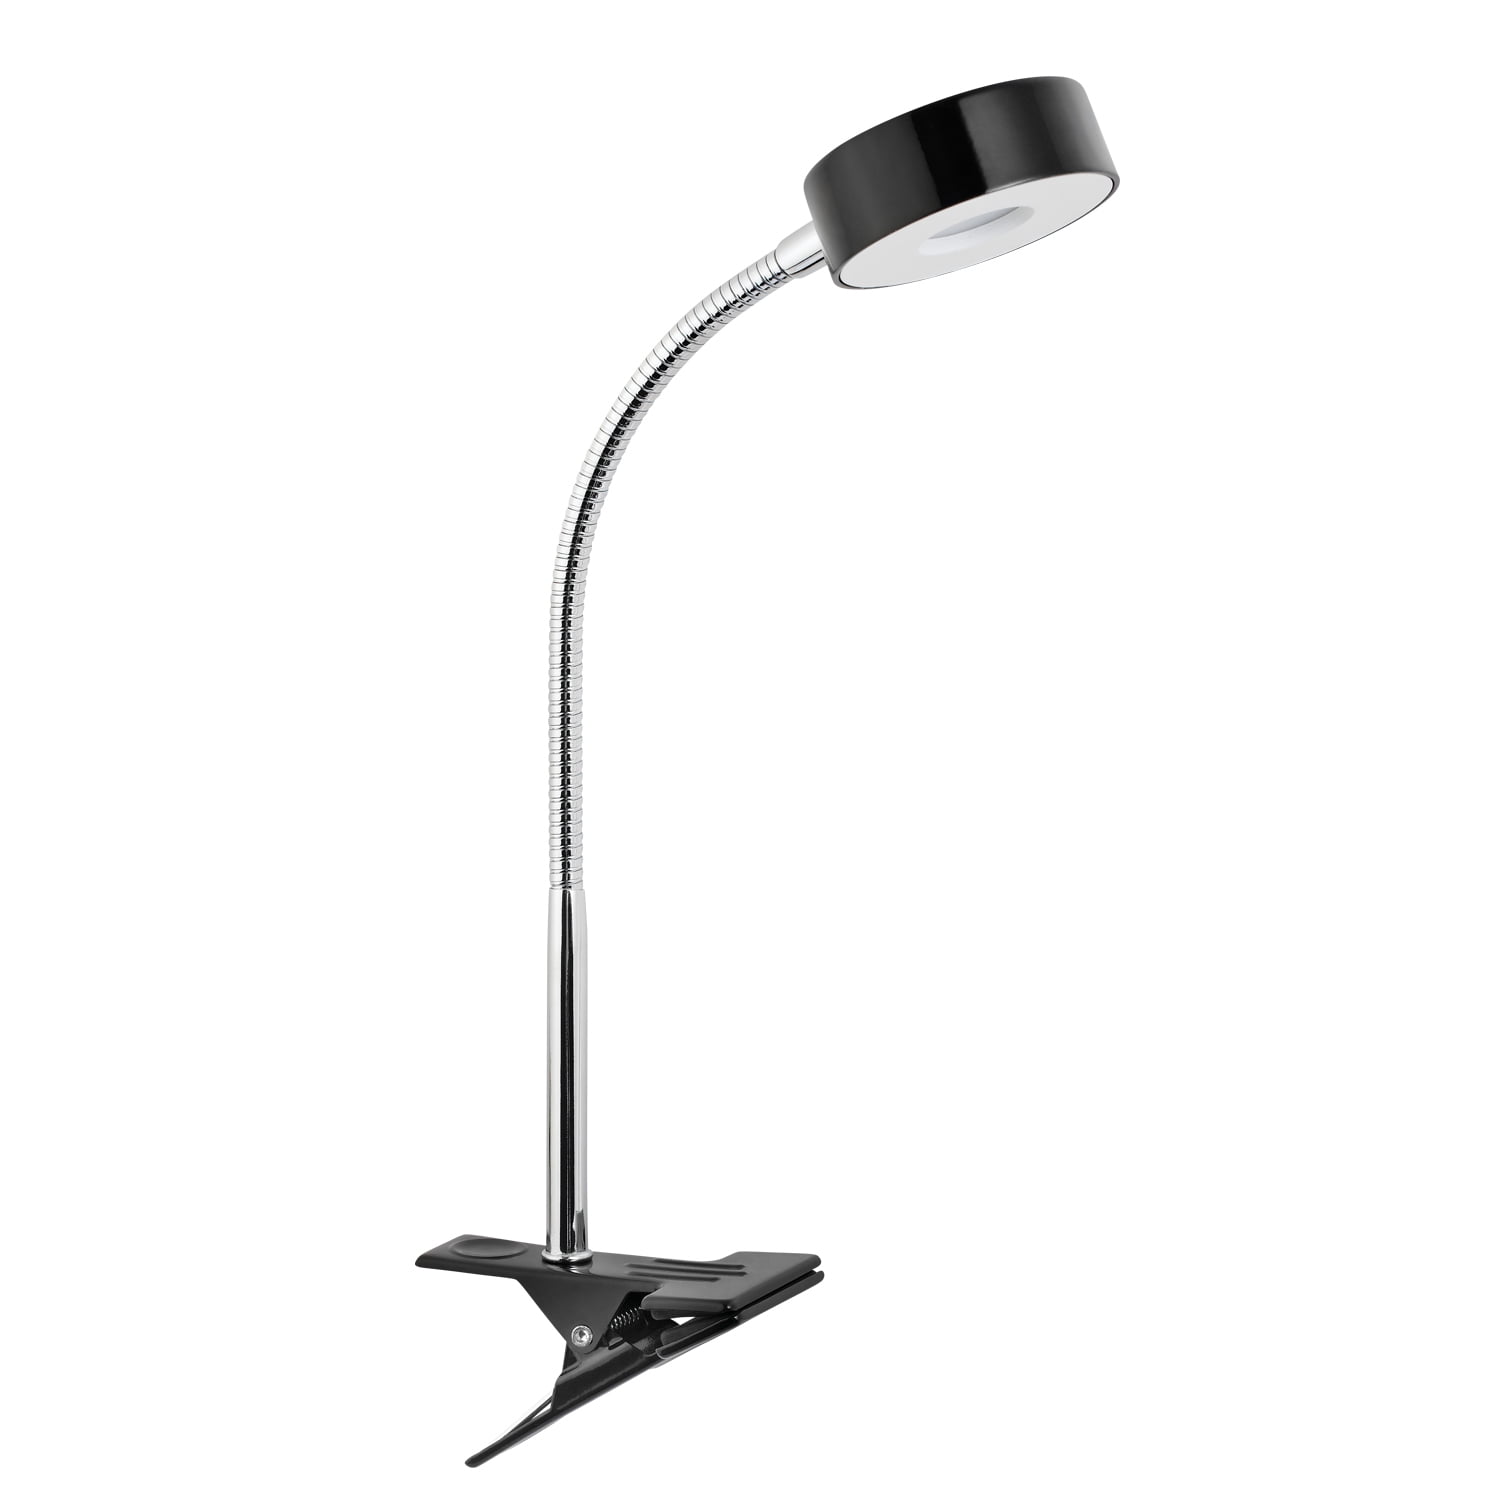 Aibecy Pro Flexible Hands Free Magnifying Glass Desk Lamp Bright LED Lighted Gooseneck Magnifier with Clamp for Reading Diamond Painting Cross Stitch